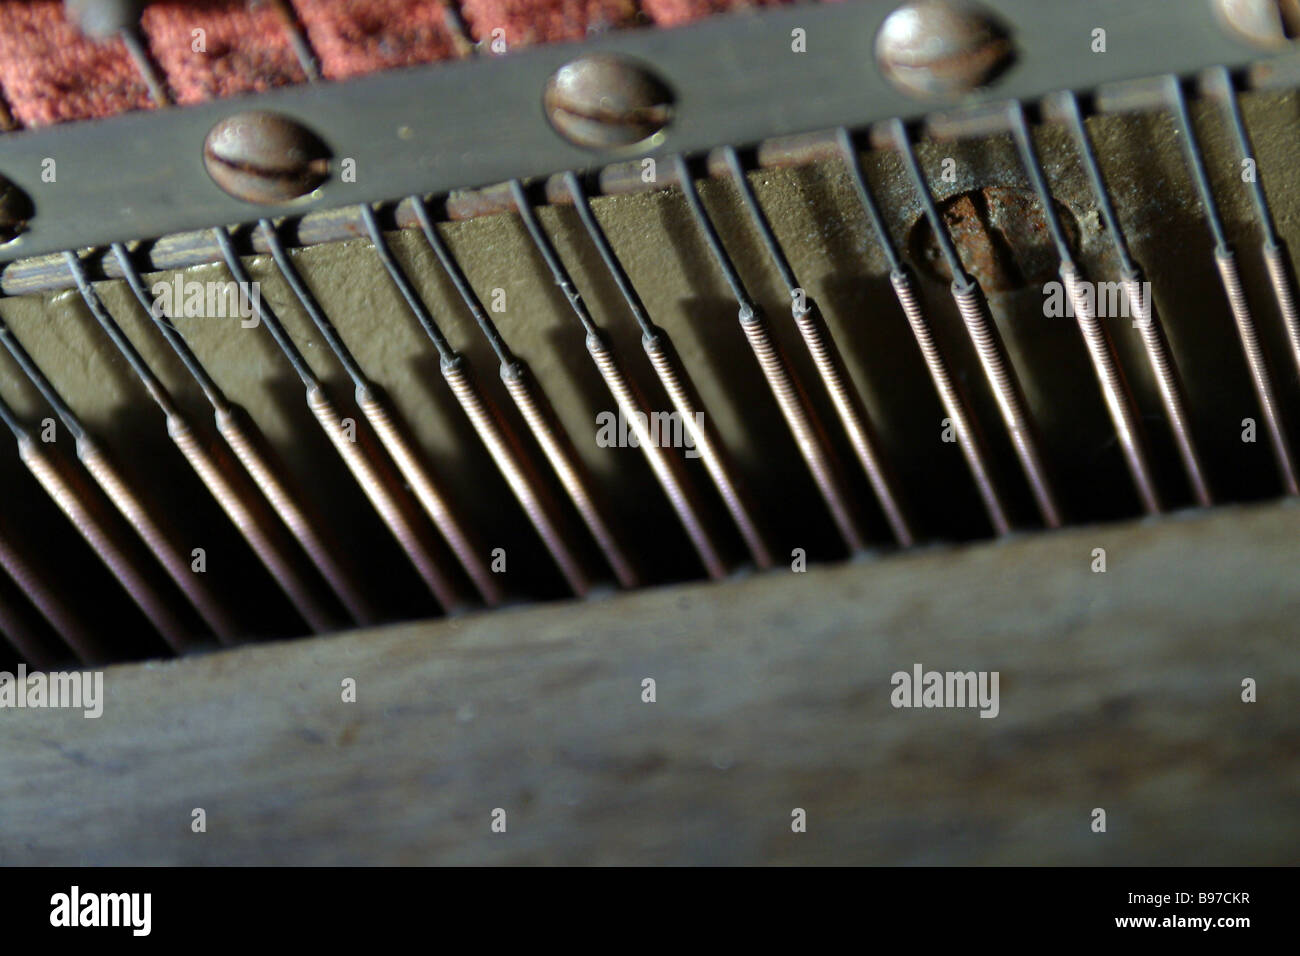 Inside workings of a piano showing steel strings dampers and tuning nuts and wooden frame Stock Photo